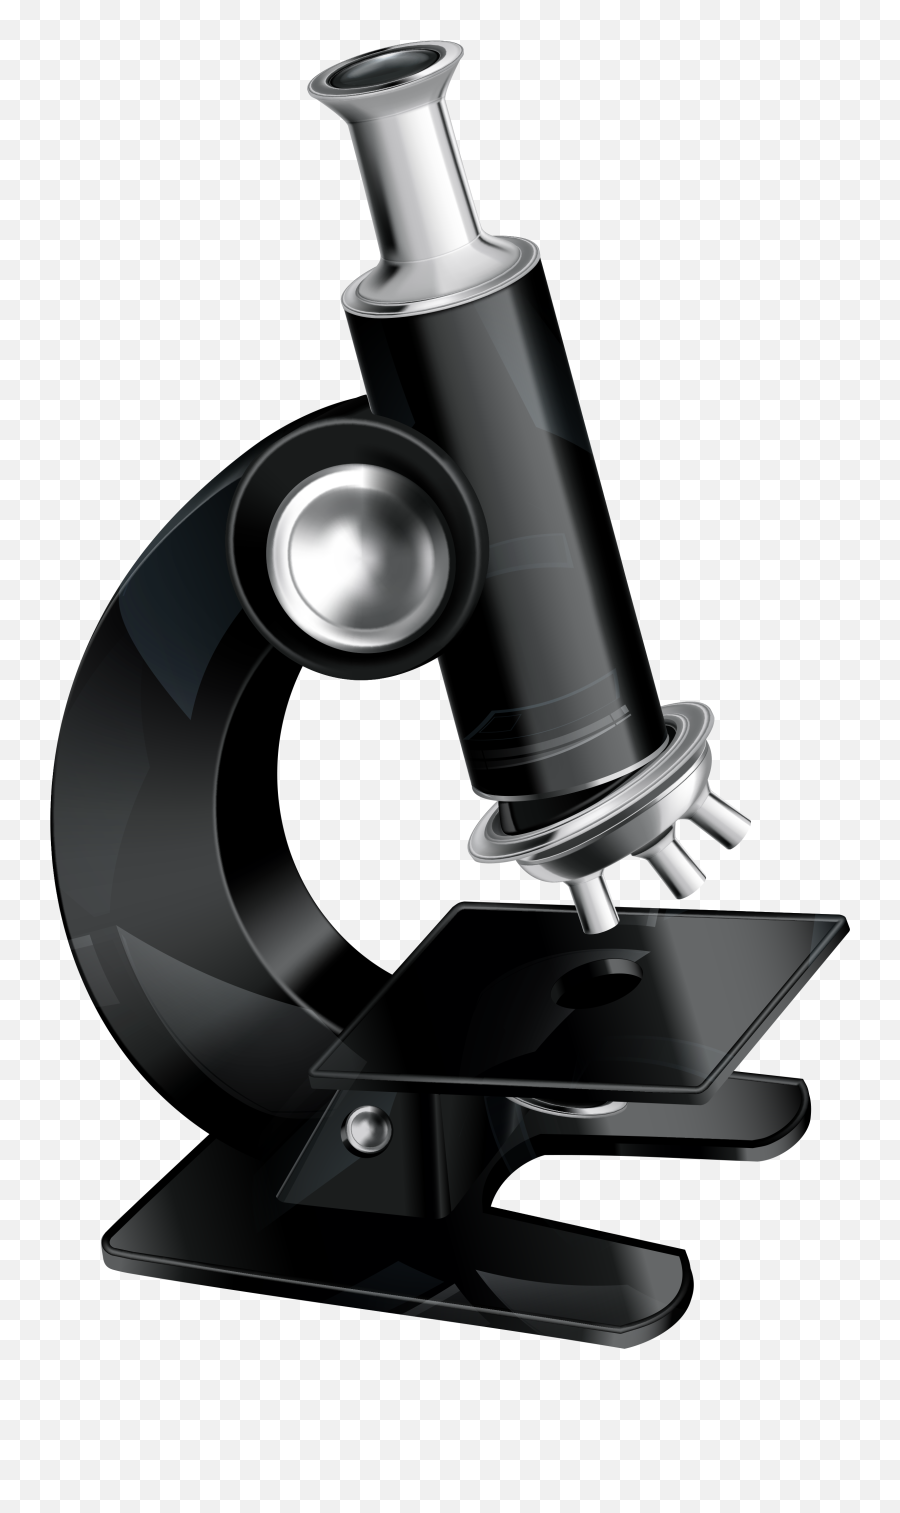 Microscope Clipart Free Images 4 Wikiclipart - Clipartingcom Emoji,Scope Clipart